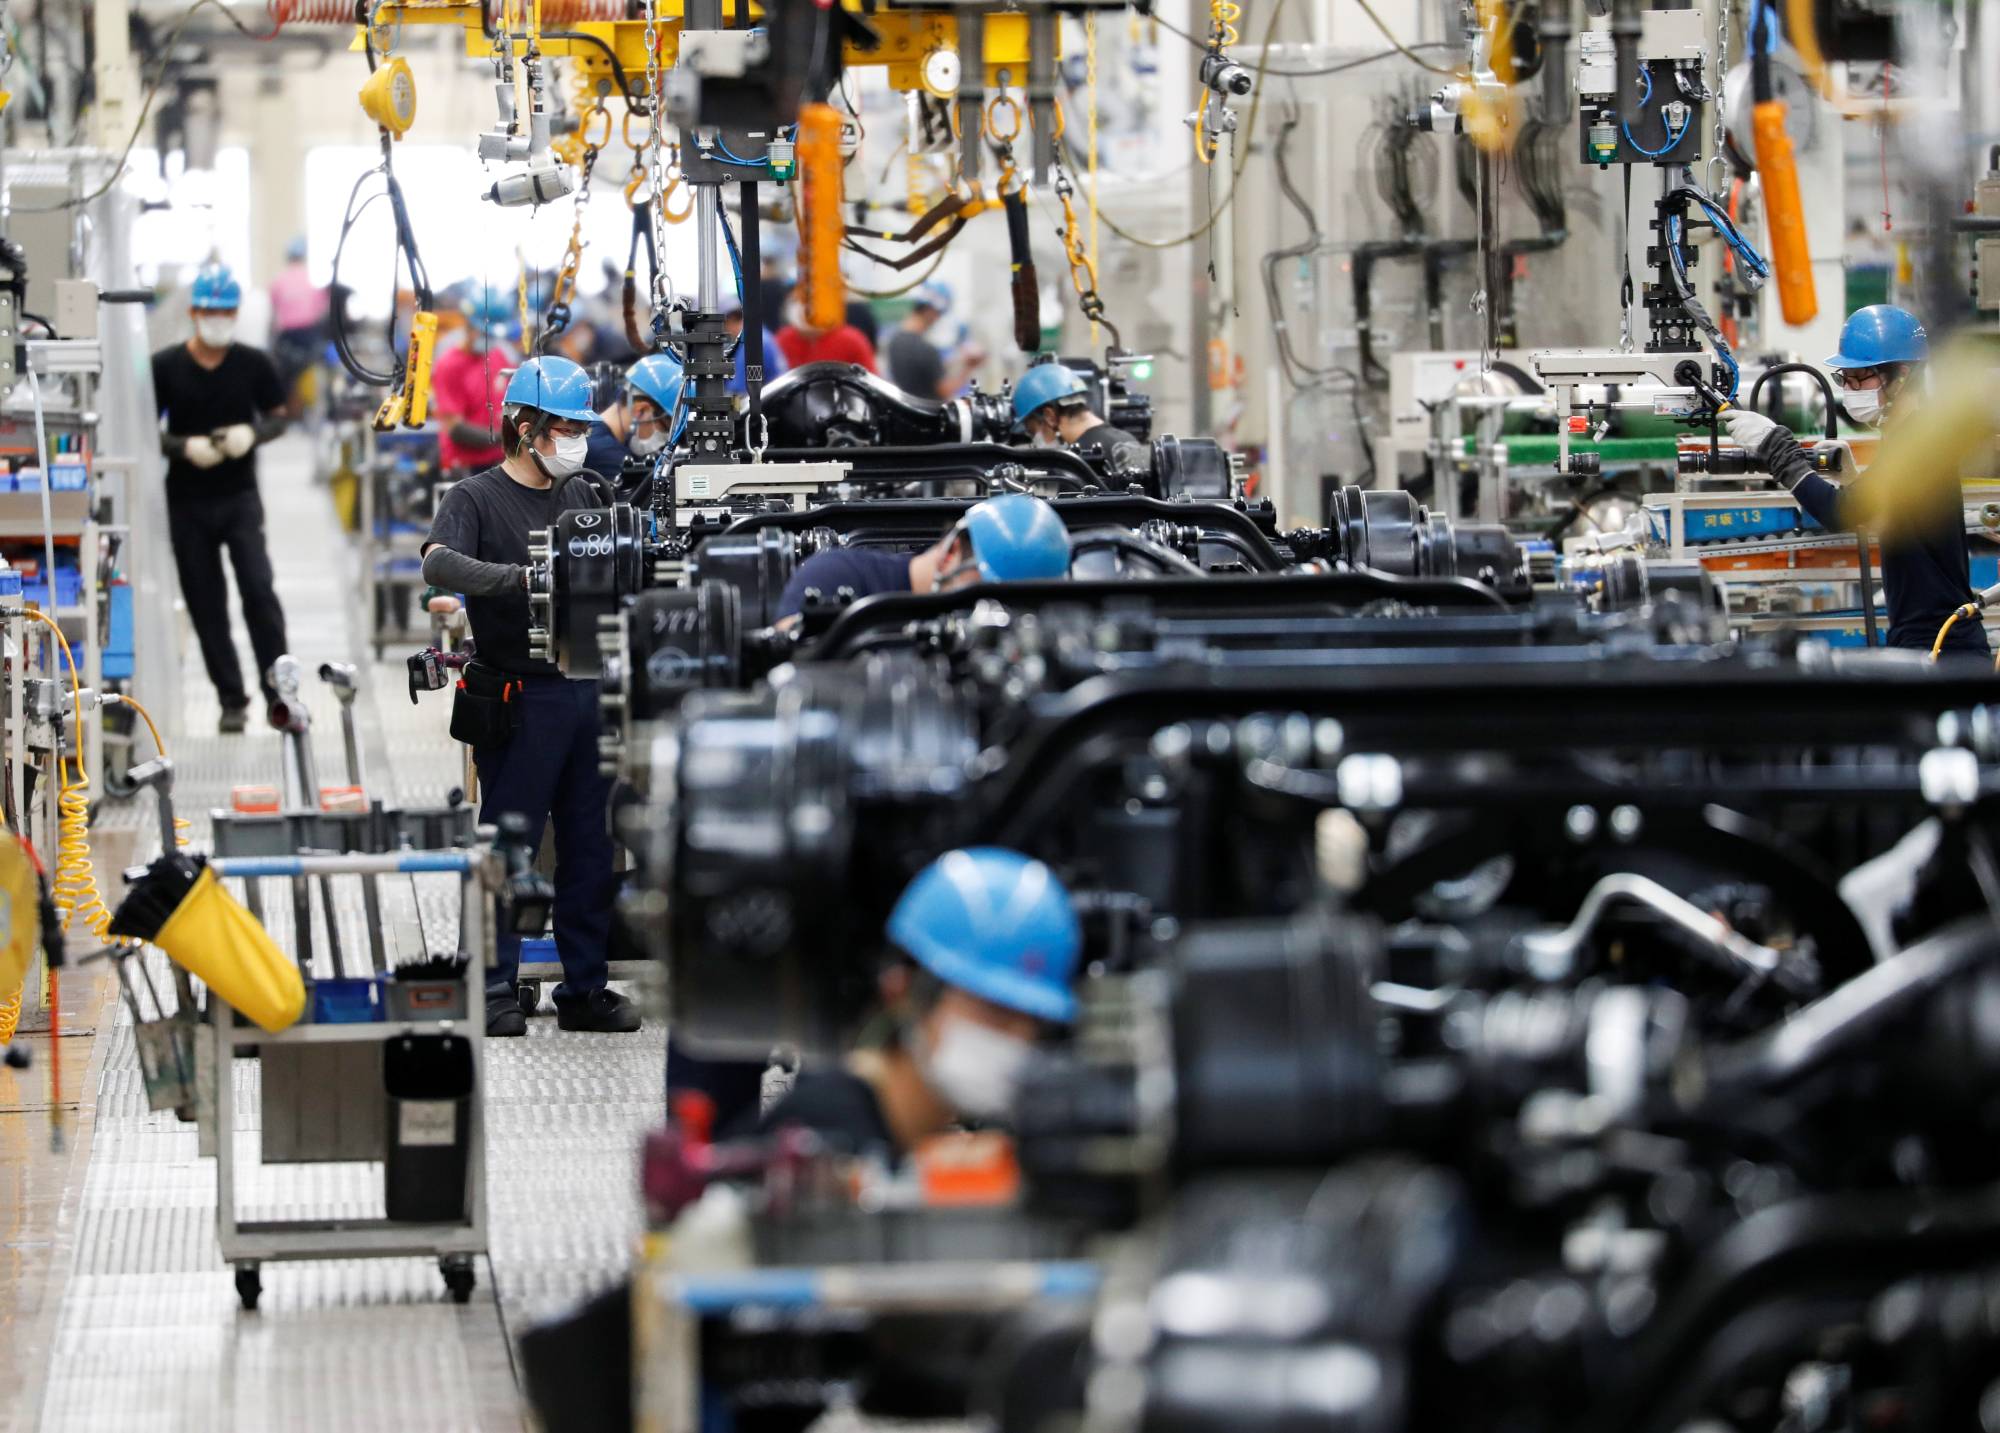 Employees work on the Mitsubishi Fuso Truck and Bus assembly line in Kawasaki in May 2020. According to an estimate by consulting firm Arthur D. Little, about 680,000 people work for auto parts suppliers, but the electric vehicle shift could see about 84,000 jobs cut by 2050. | REUTERS